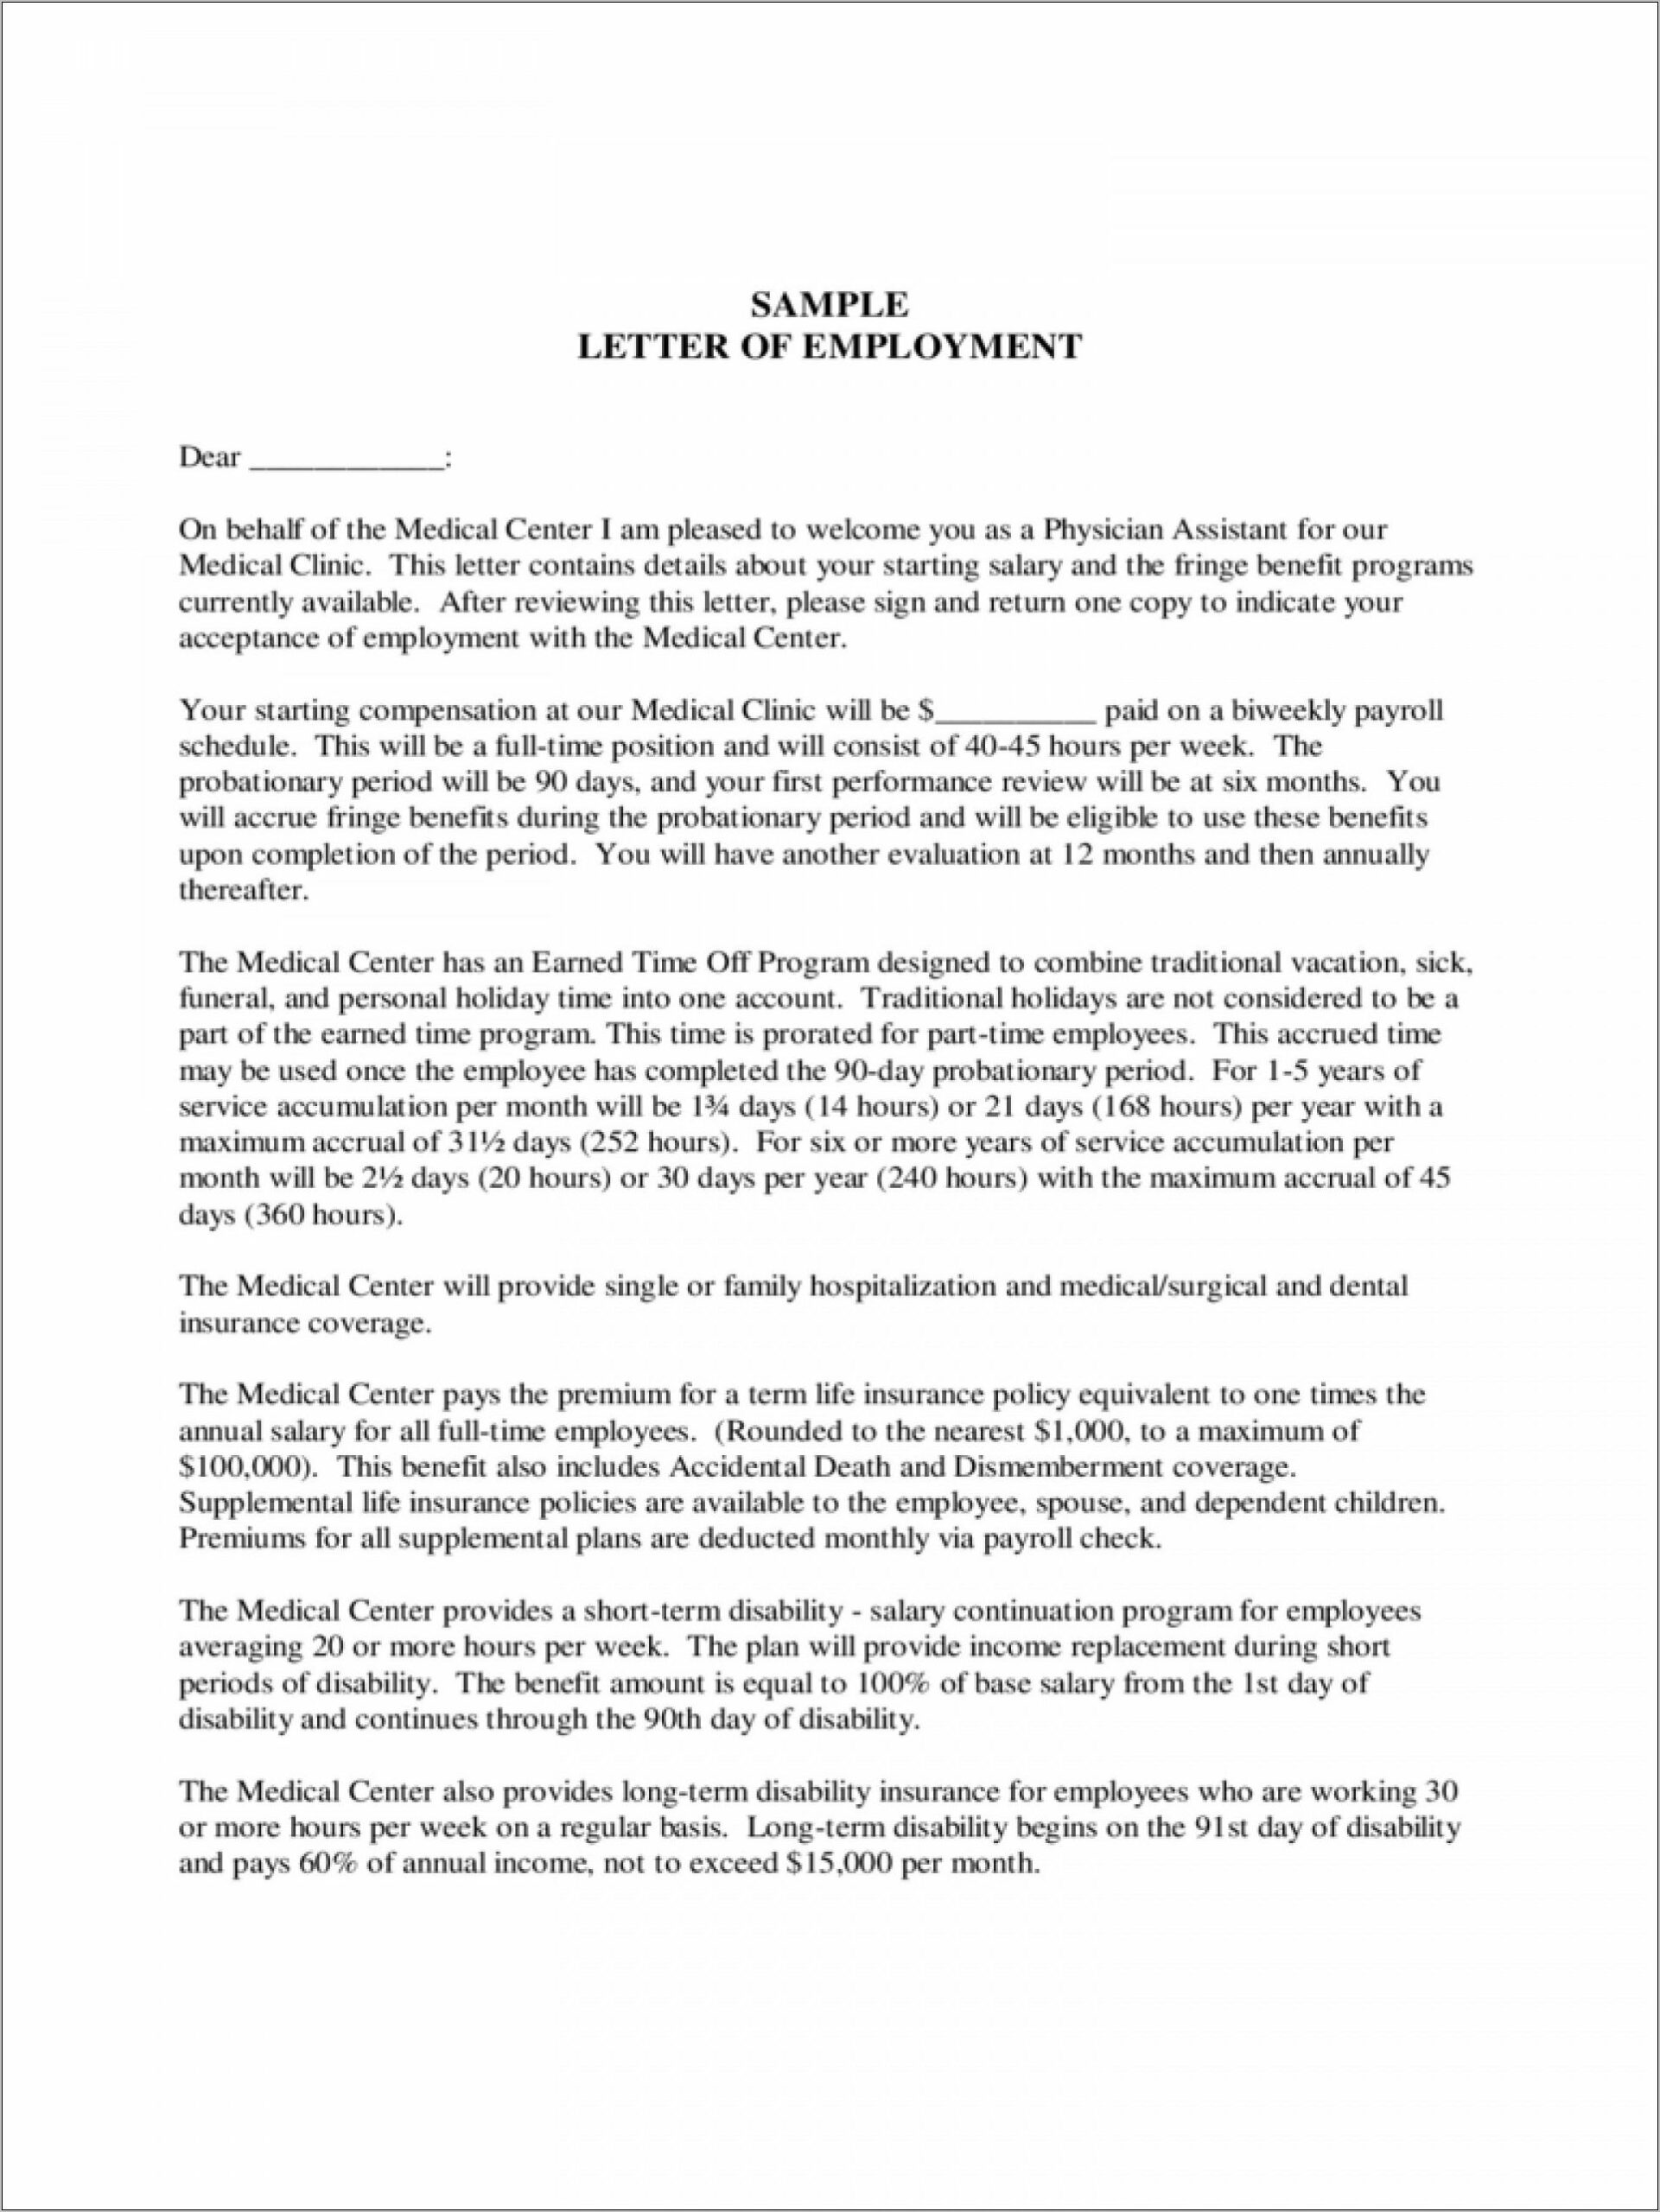 Sample Physician Employment Agreement Contract